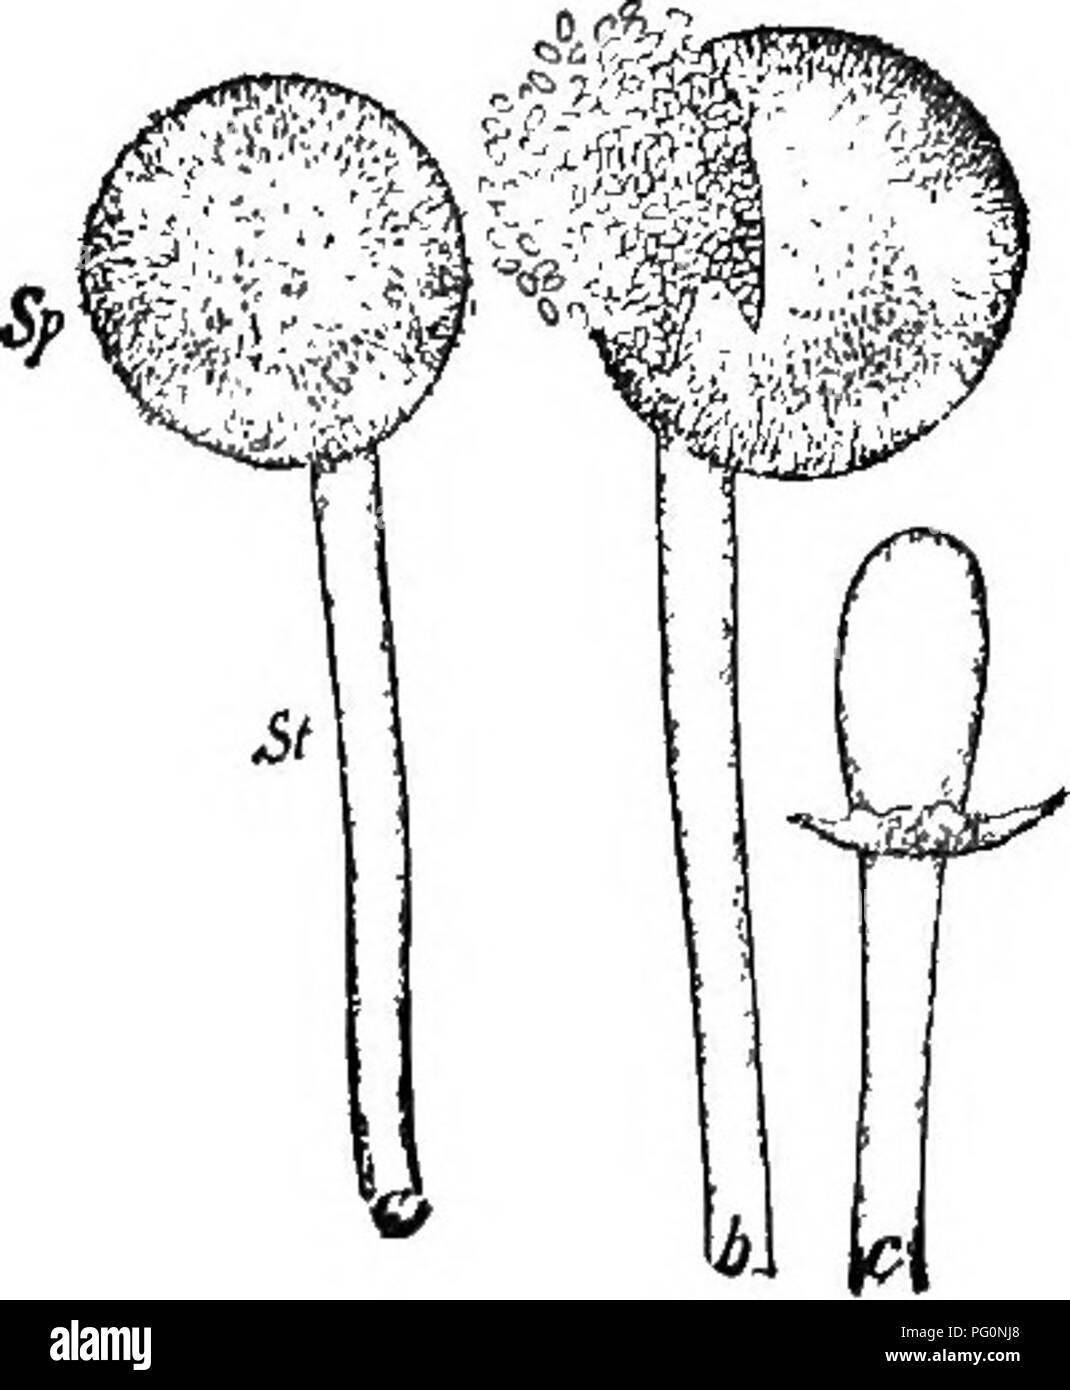 . Beginners' botany. Botany. STUDIES IN CRYPTOGAMS 189. Fig. 274. — MucoR. , sporangium; 3, sporangium bursting; c', columella. delicate stalk, the sporangiophore. The stalk is separated from the sporangium by a wall which is formed at the base of the spo- rangium. This wall, however, does not extend straight across the thread, but it arches up into the sporangium like an inverted pear. It is known as the col- umella, c. When the sporangium is placed in water, the wall immediately dissolves and allows hundreds of spores, which were formed in the cavity within the sporangium, to escape, b. All  Stock Photo